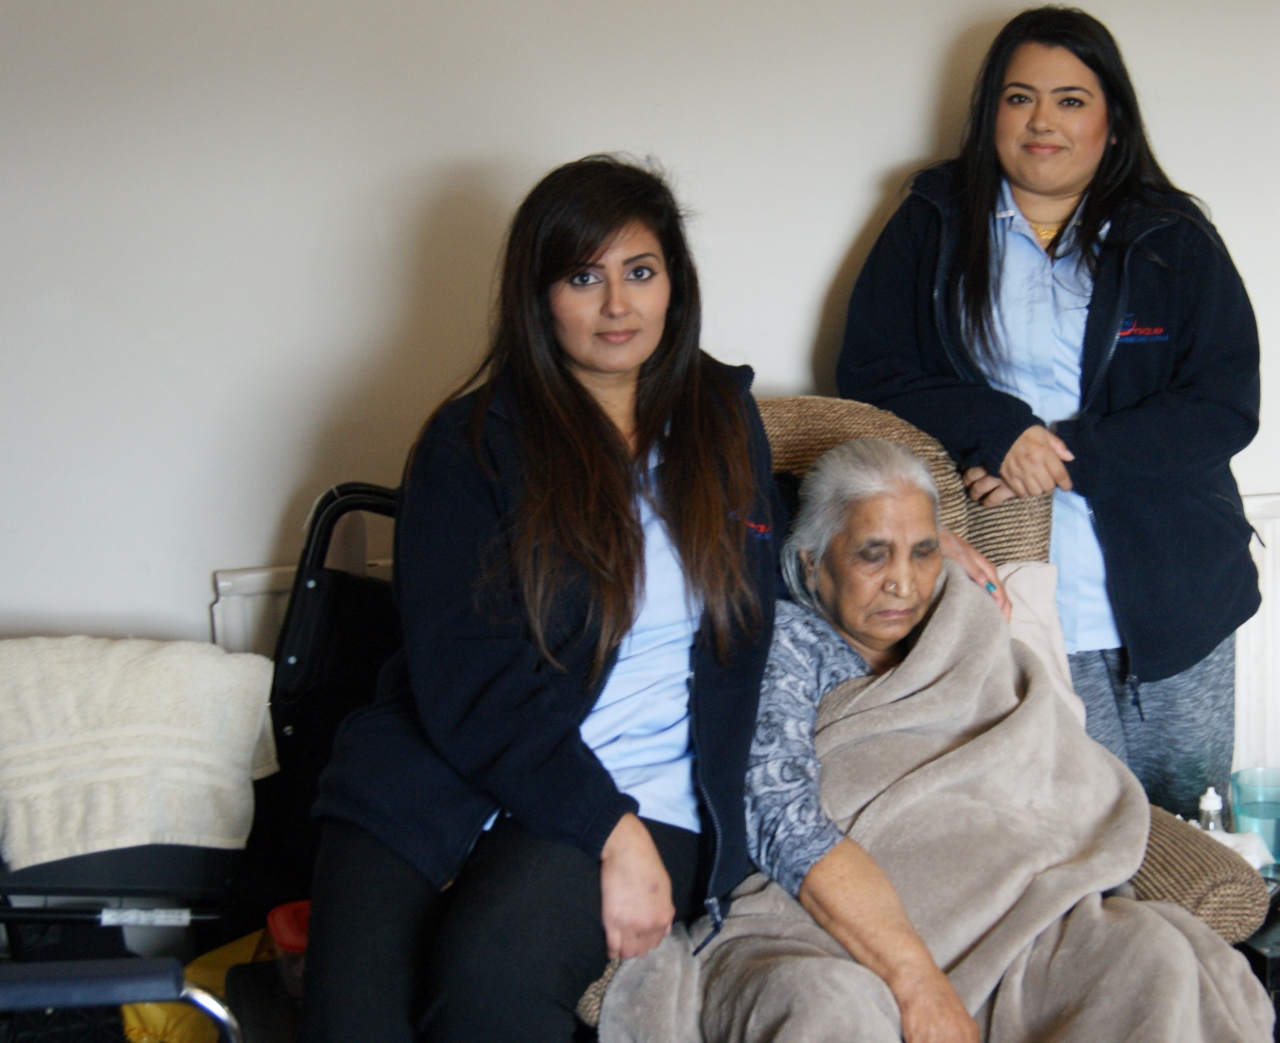 SUPPORT: A happy Care Unique service user with two of their care workers who are supplying smiles to the people of Bradford and beyond